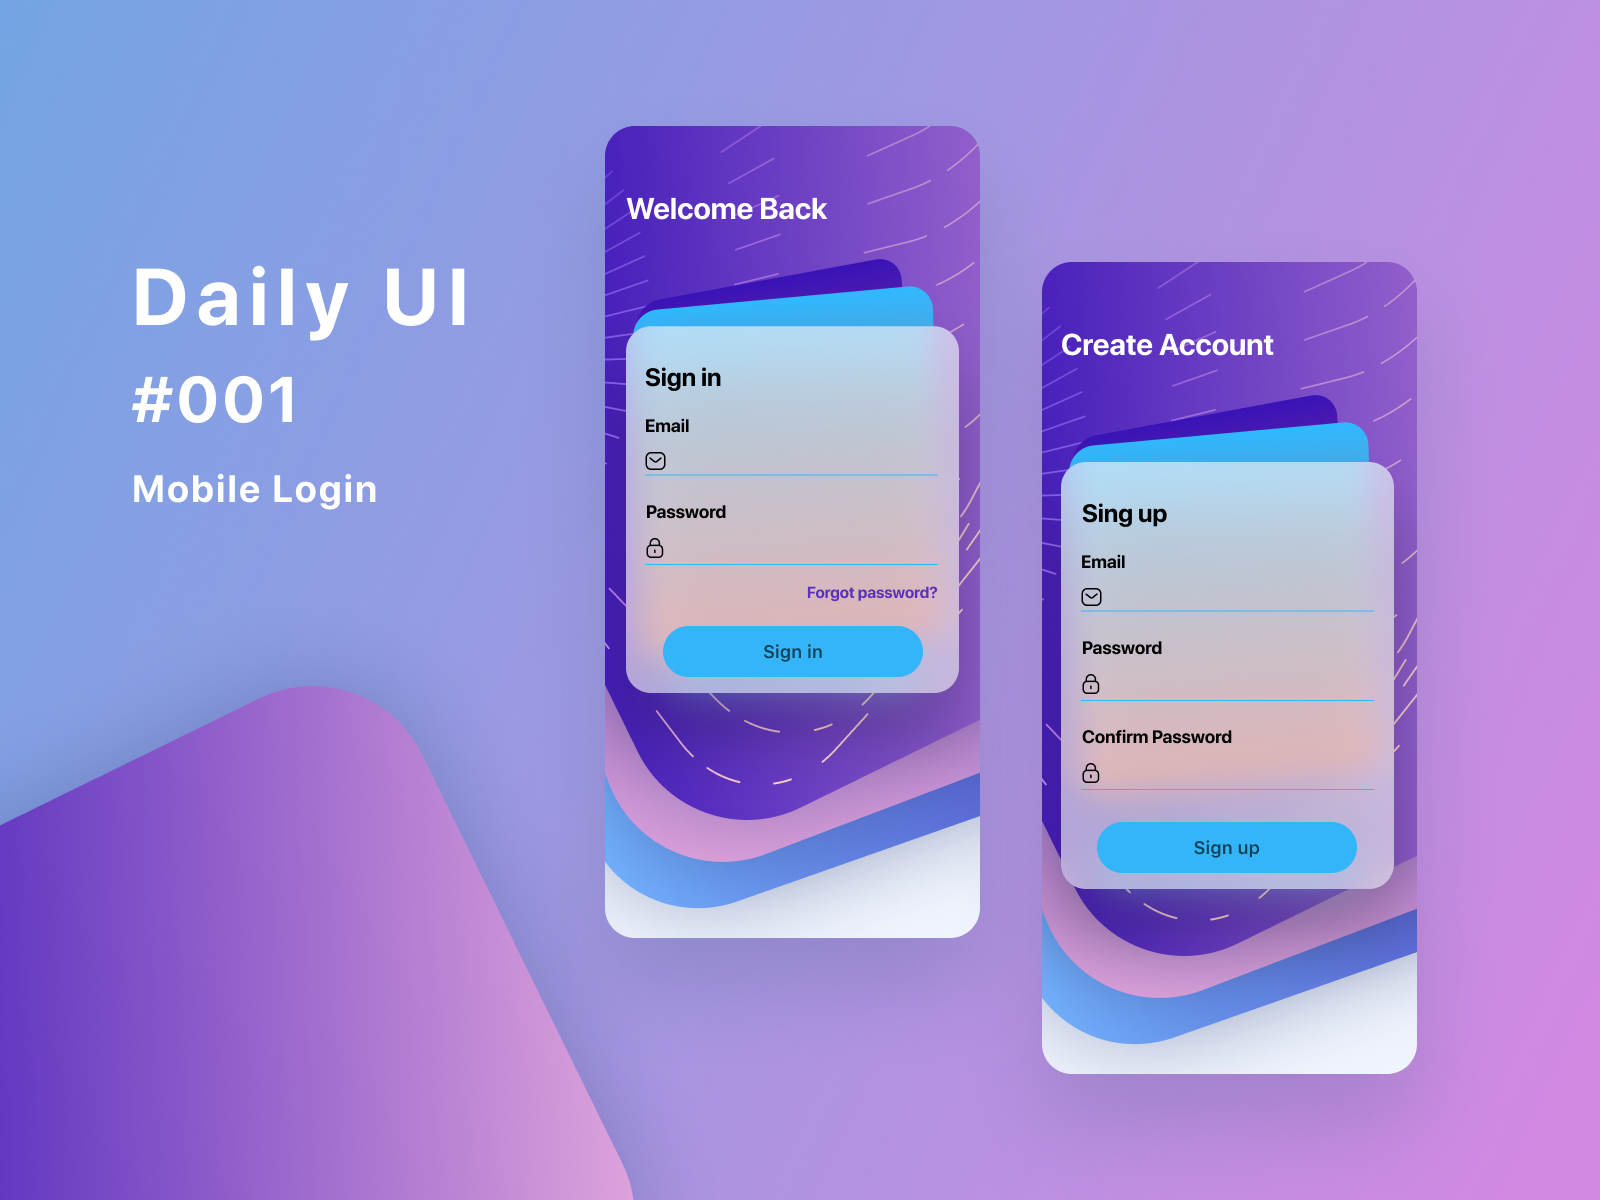 Daily UI #001 - Mobile Login by George Billis on Dribbble